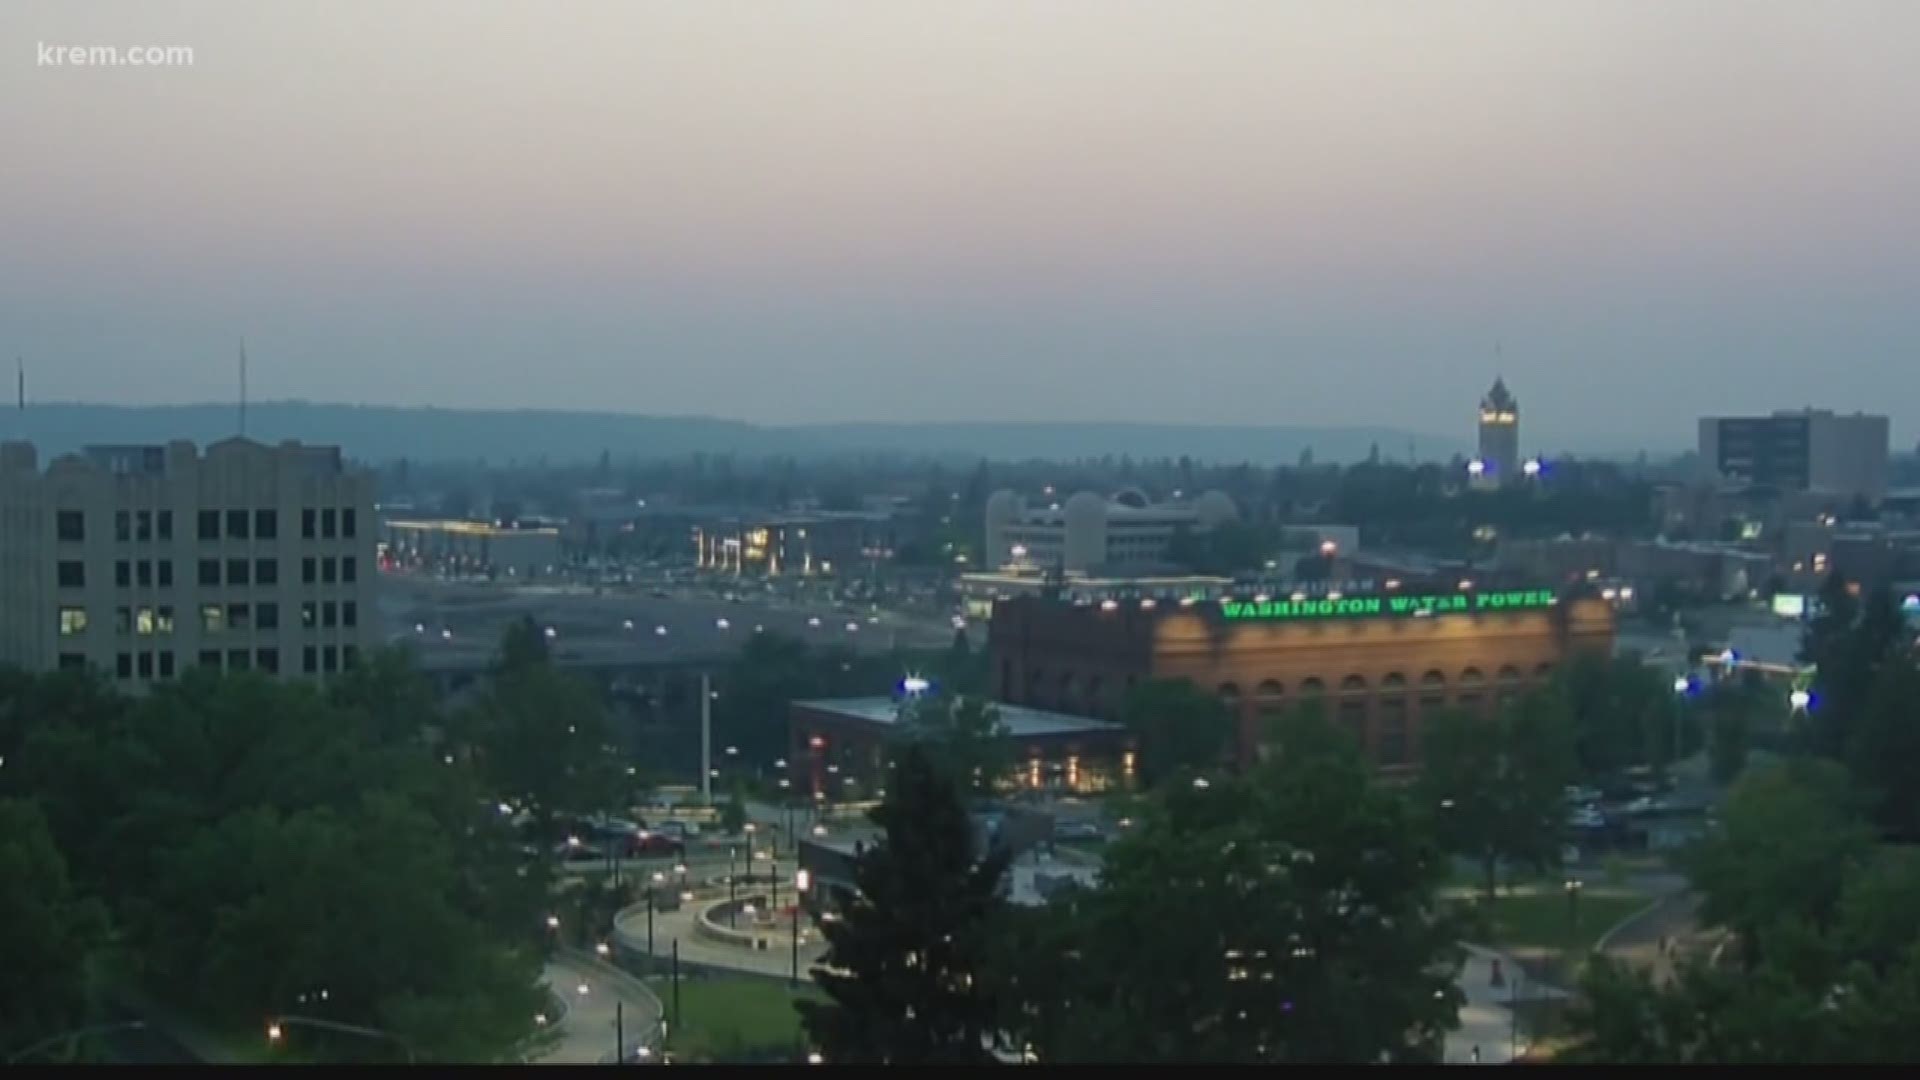 Does unhealthy air impact tourism in Spokane? (8-15-18)